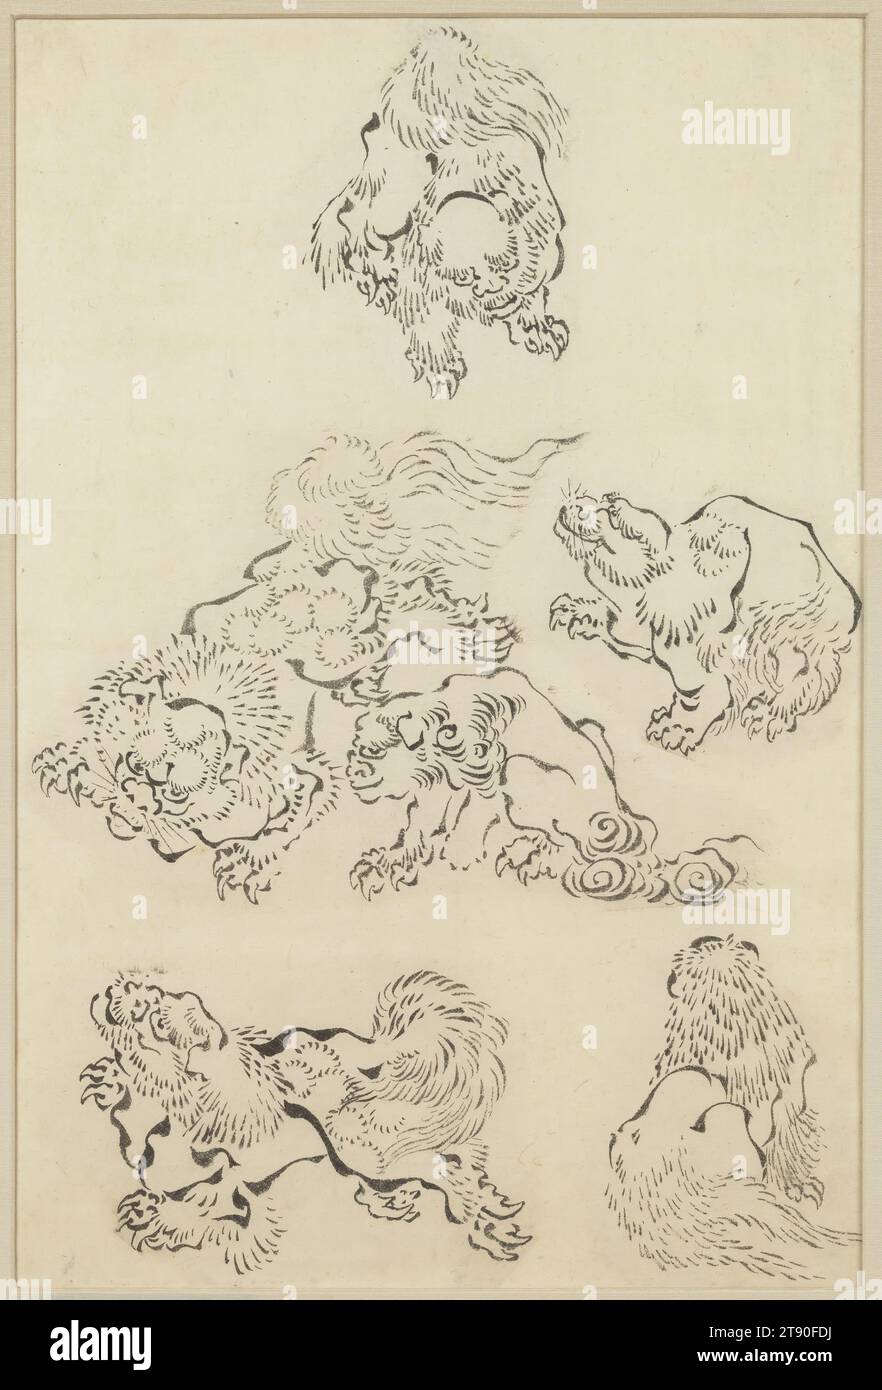 Six Lions, 19th century, Katsushika Hokusai, Japanese, 1760 - 1849, 17 3/8 × 11 11/16 in. (44.13 × 29.69 cm) (sight)23 7/8 × 17 1/2 × 1 7/8 in. (60.64 × 44.45 × 4.76 cm) (outer frame), Ink on paper, Japan, 19th century Stock Photo